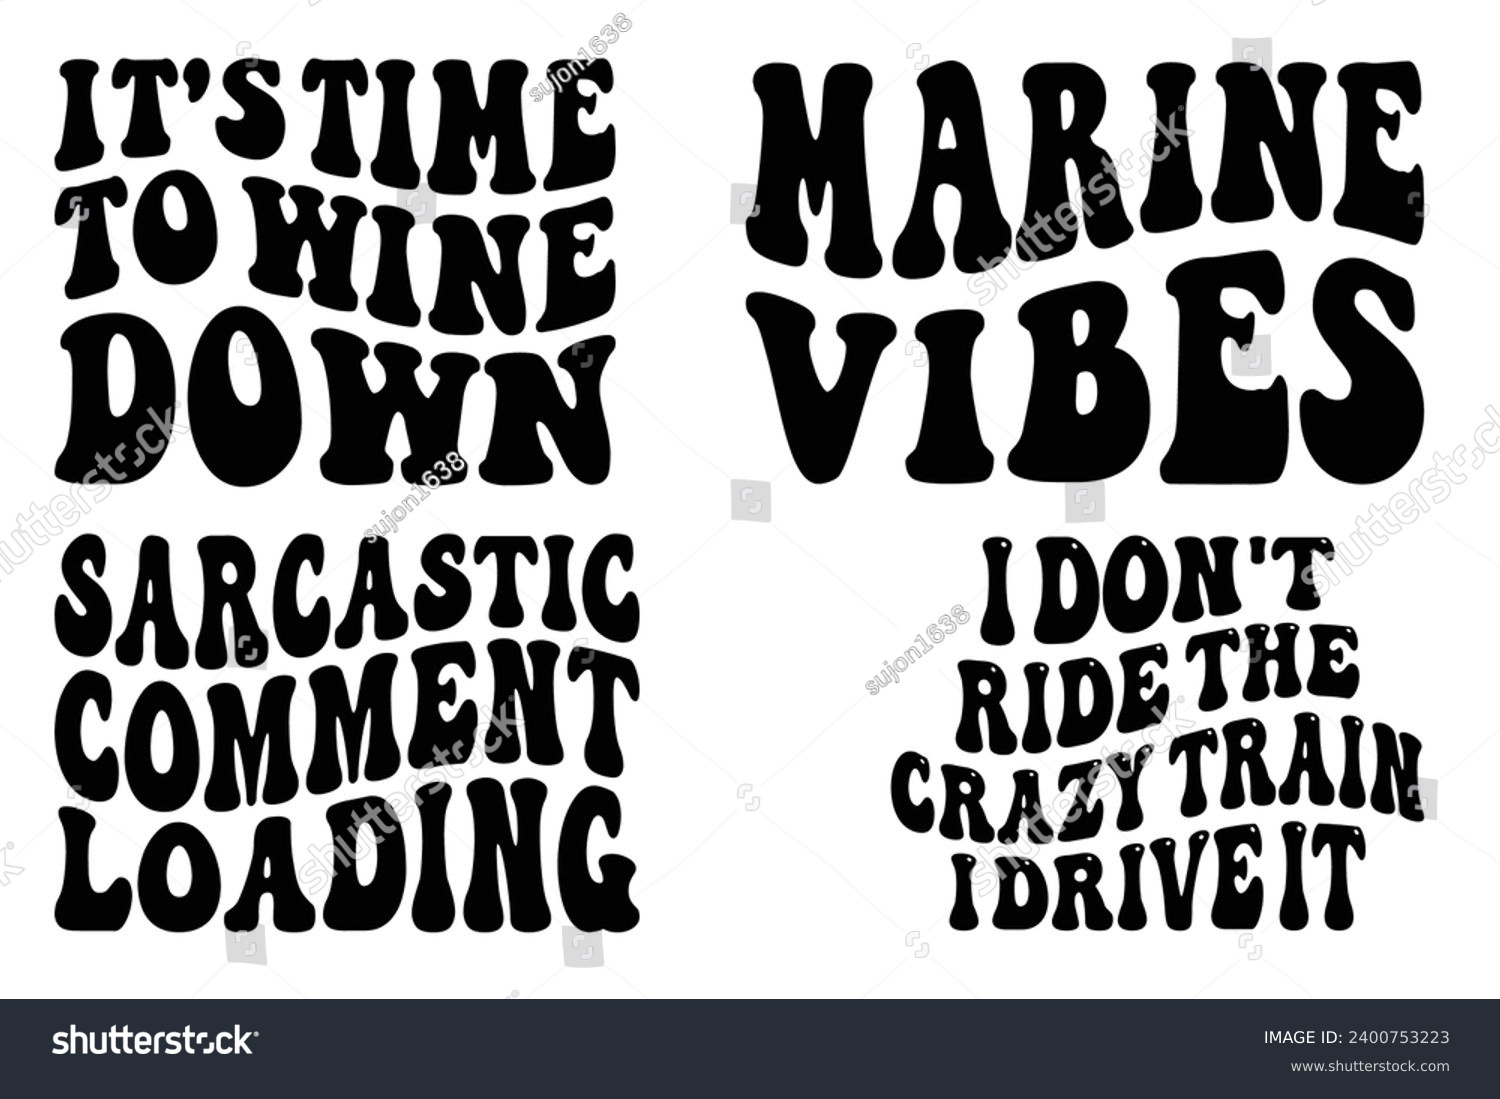 SVG of It's Time to Wine Down, Marine Vibes, I Don't Ride the Crazy Train I Drive it, sarcastic comment loading retro wavy T-shirt svg